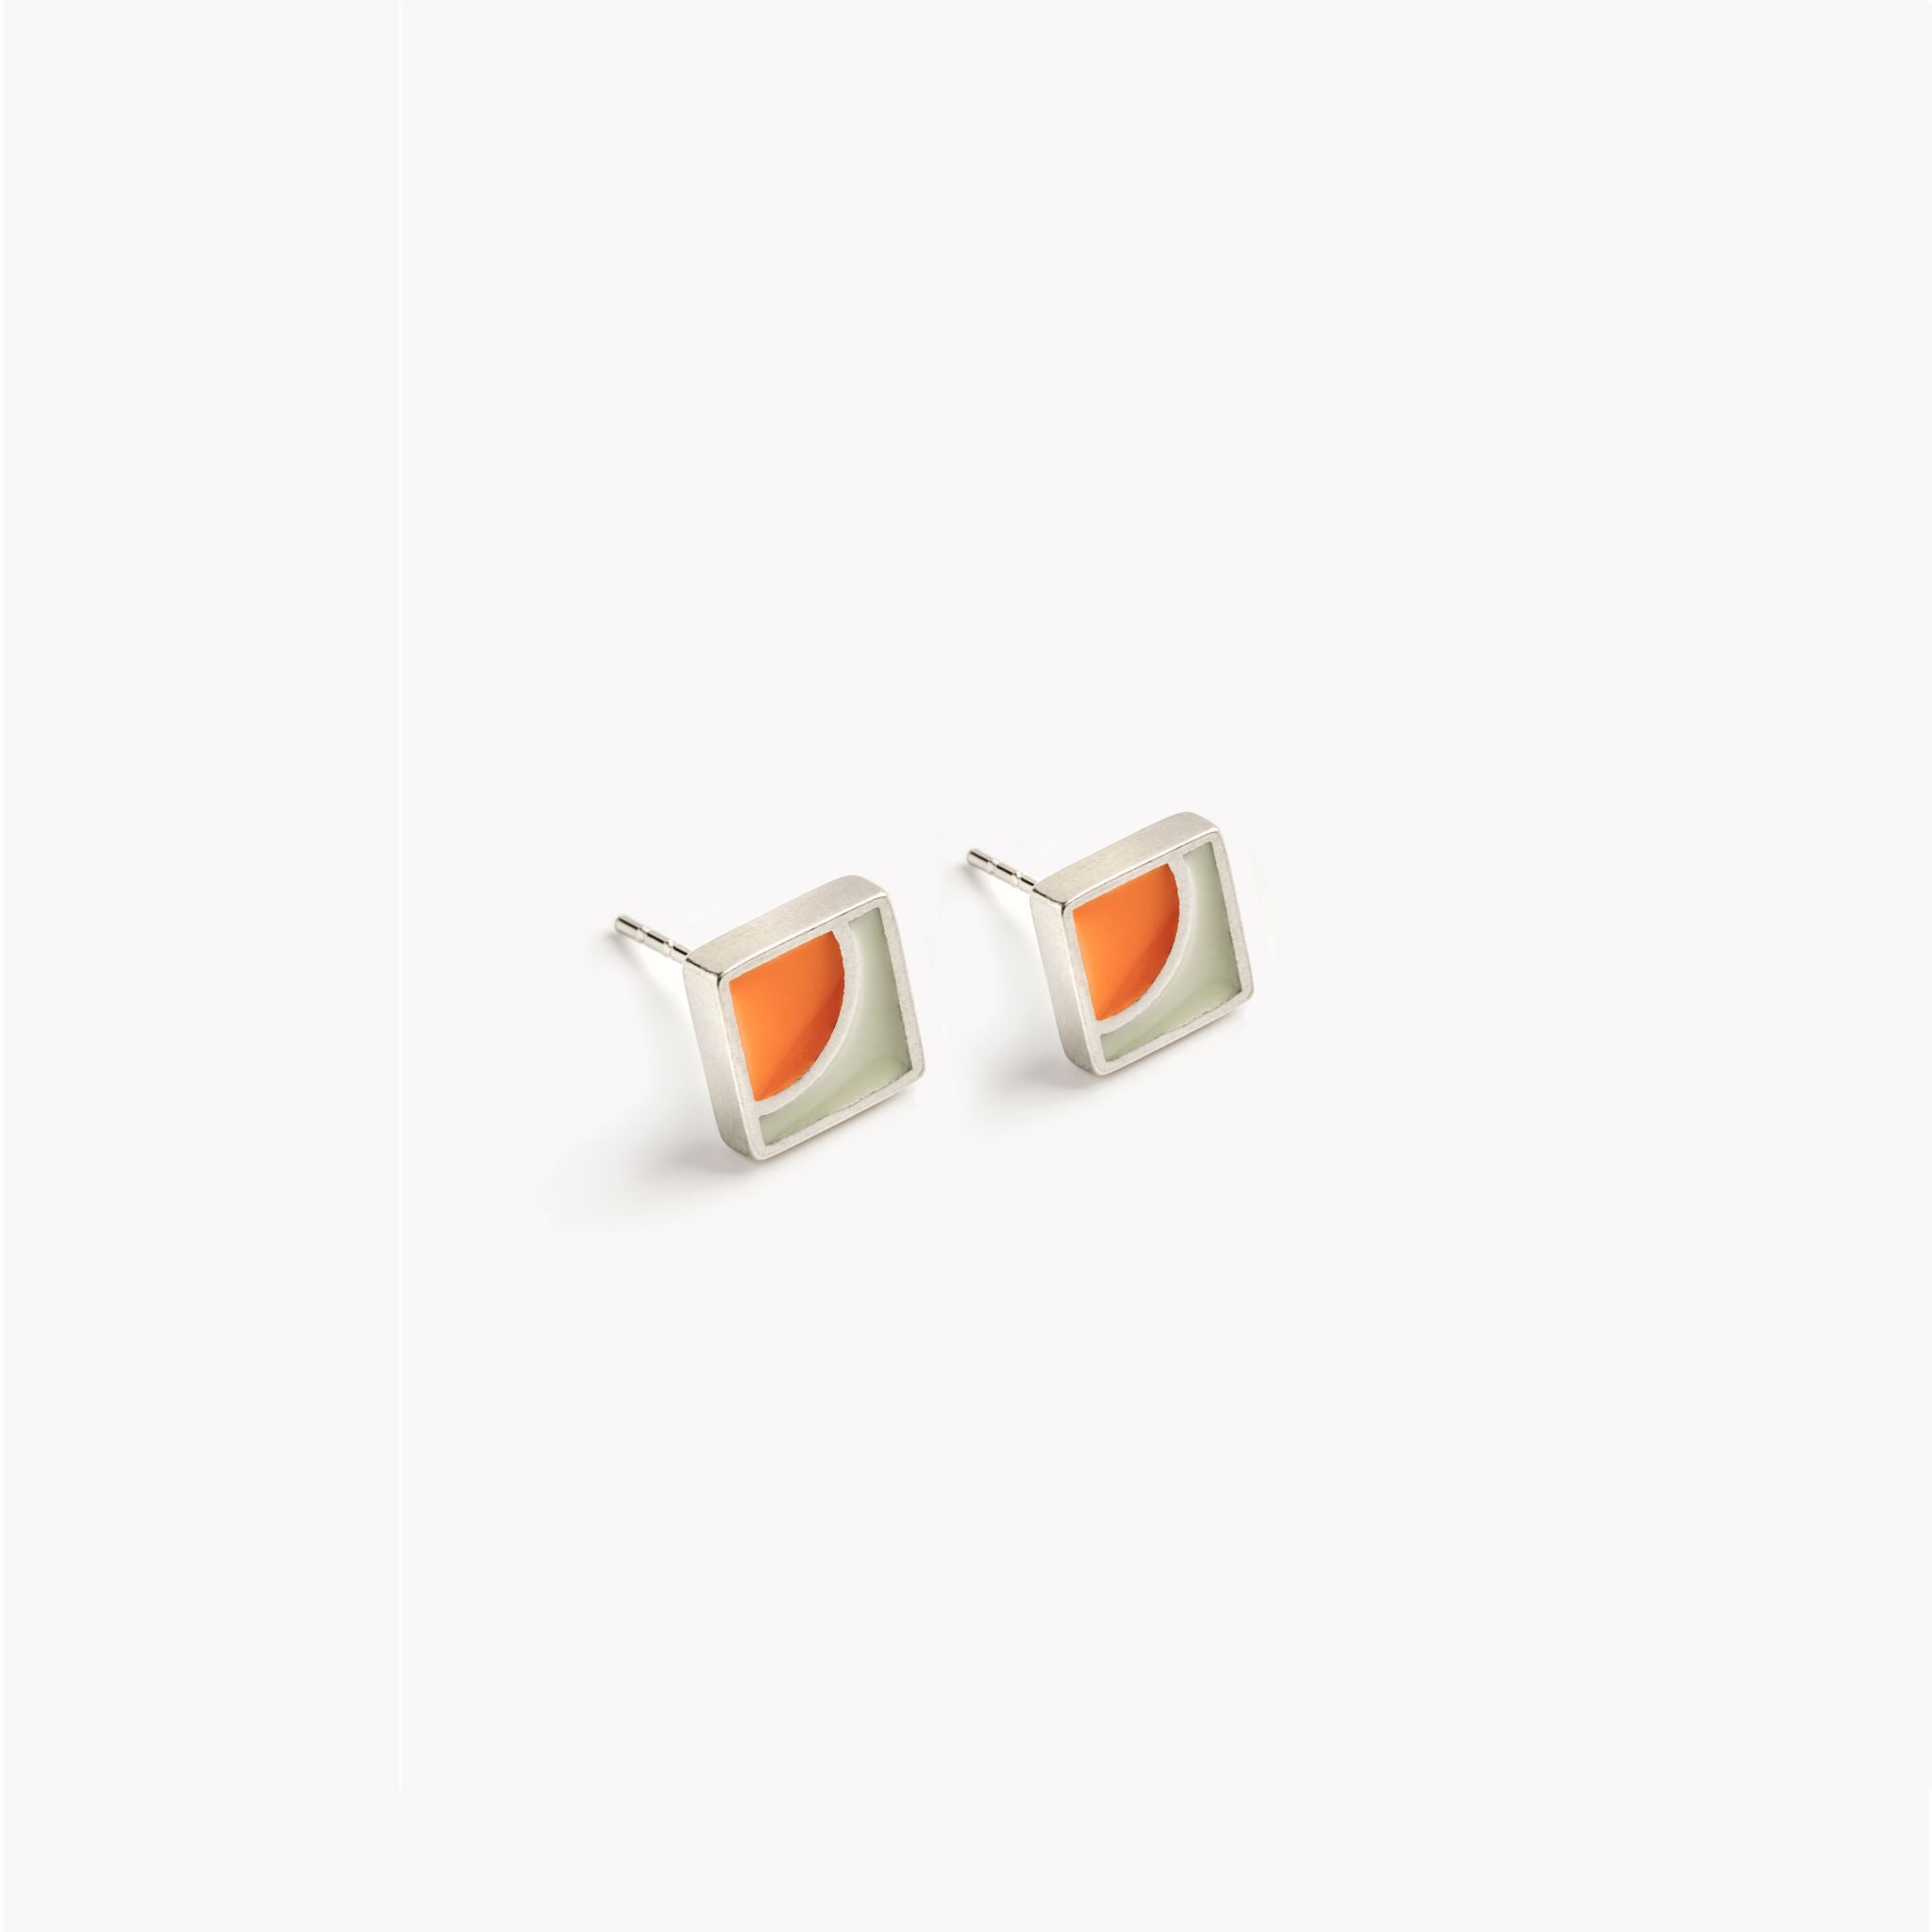 Orange and grey square stud earrings, pewter ear studs, colourful and  square, silver tone, simple minimal design. Warm grey and orange citrus tones, handmade in Wales using recycled tin.